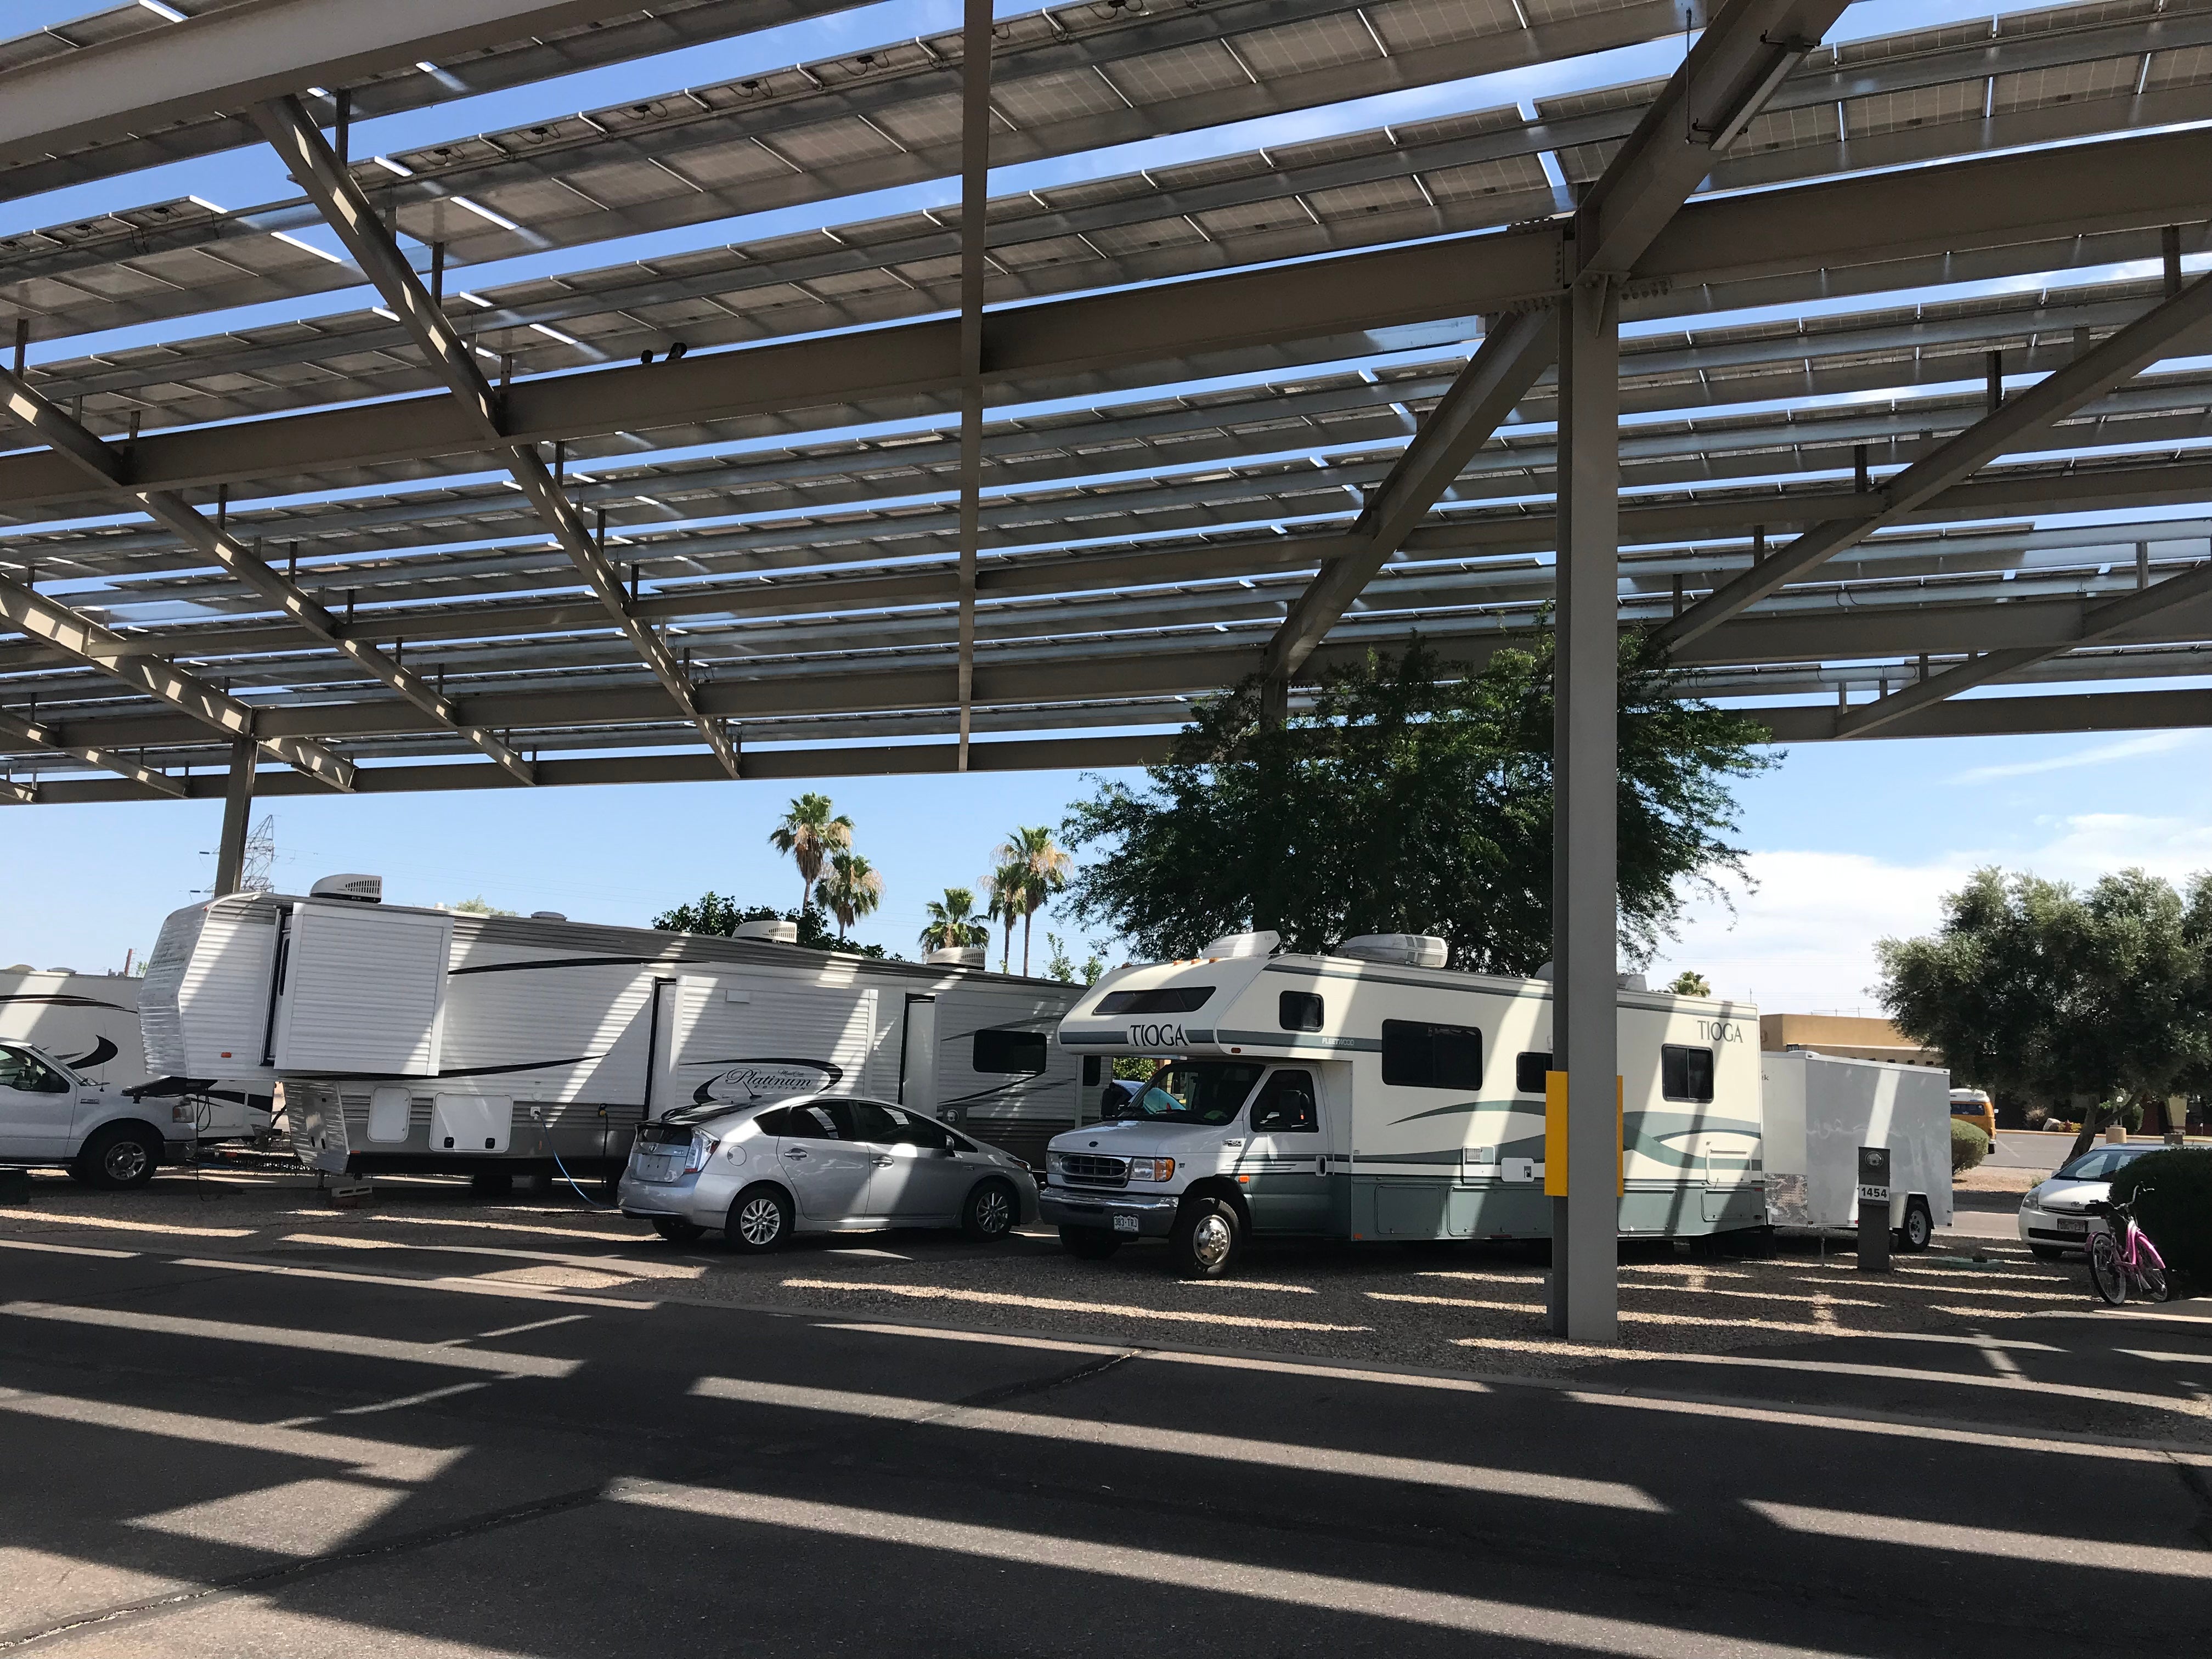 Gigantic solar shade array above RV sites. Green energy nicely shades your rigs